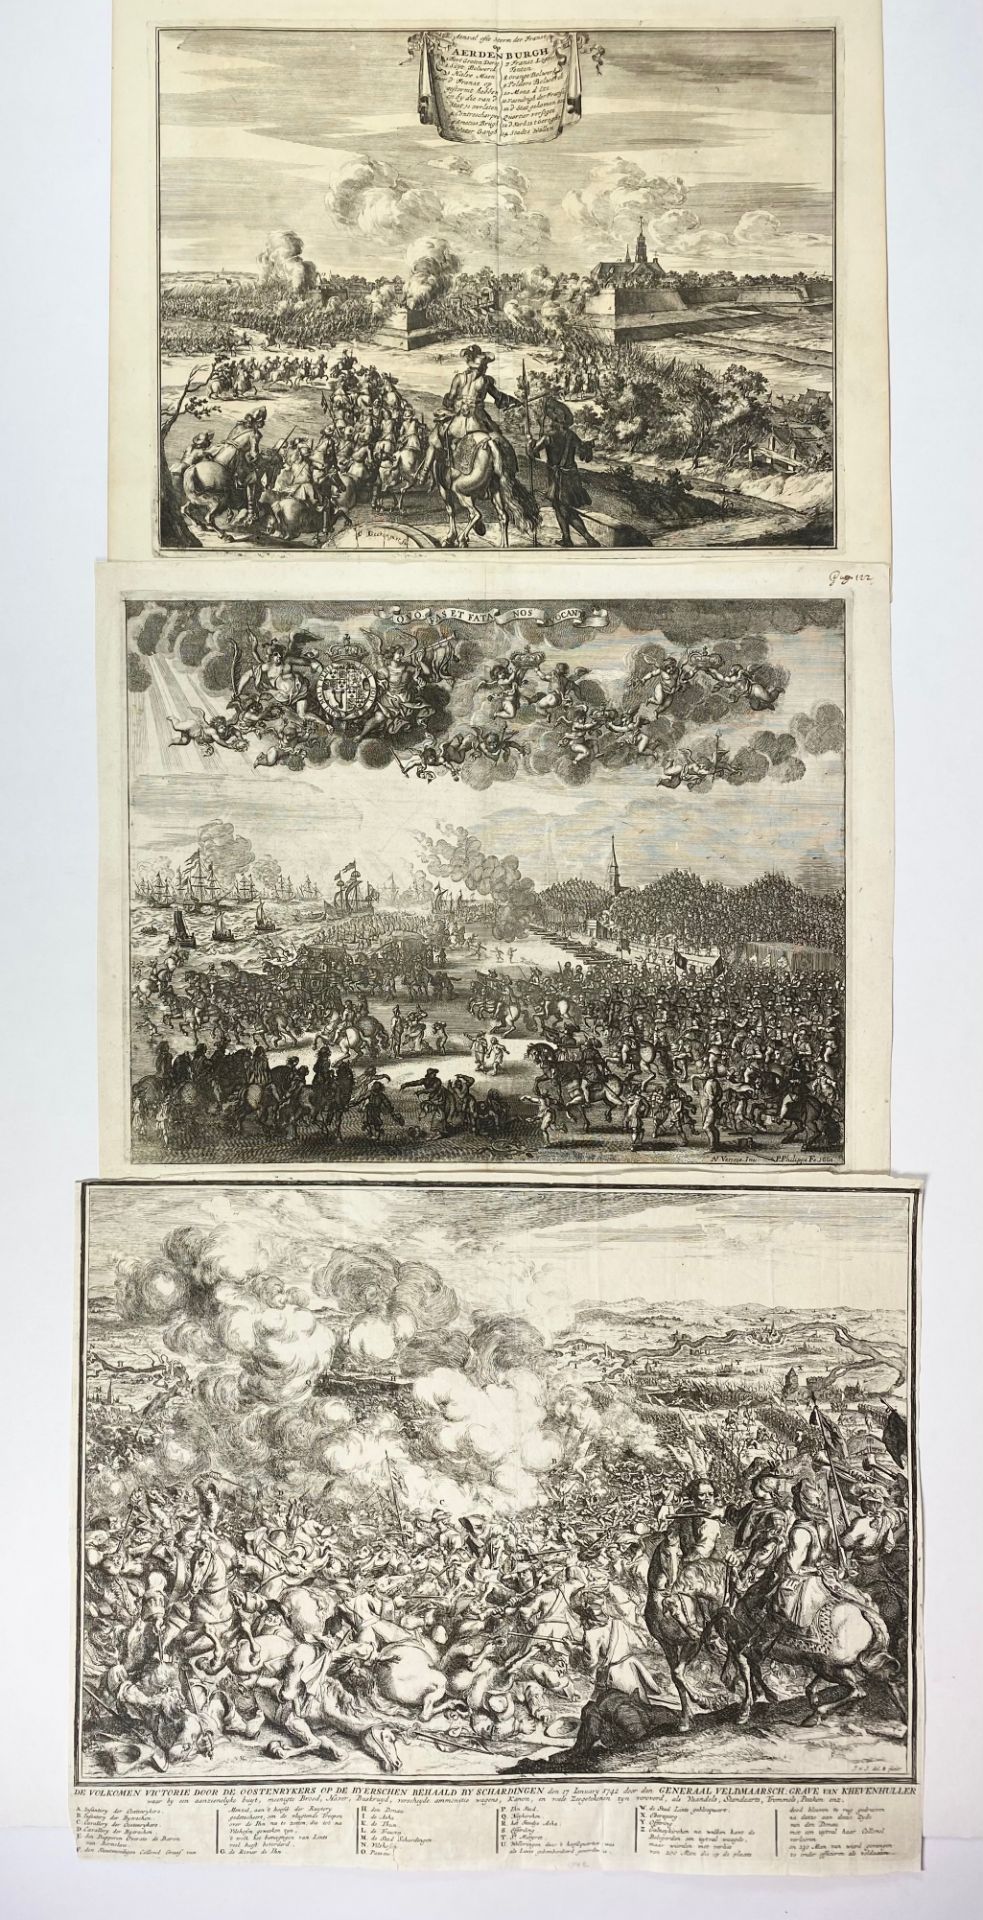 SIEGES & WARFARE -- COLLECTION of 40 engr./lithogr. plates on sieges a.o. military - Bild 2 aus 3